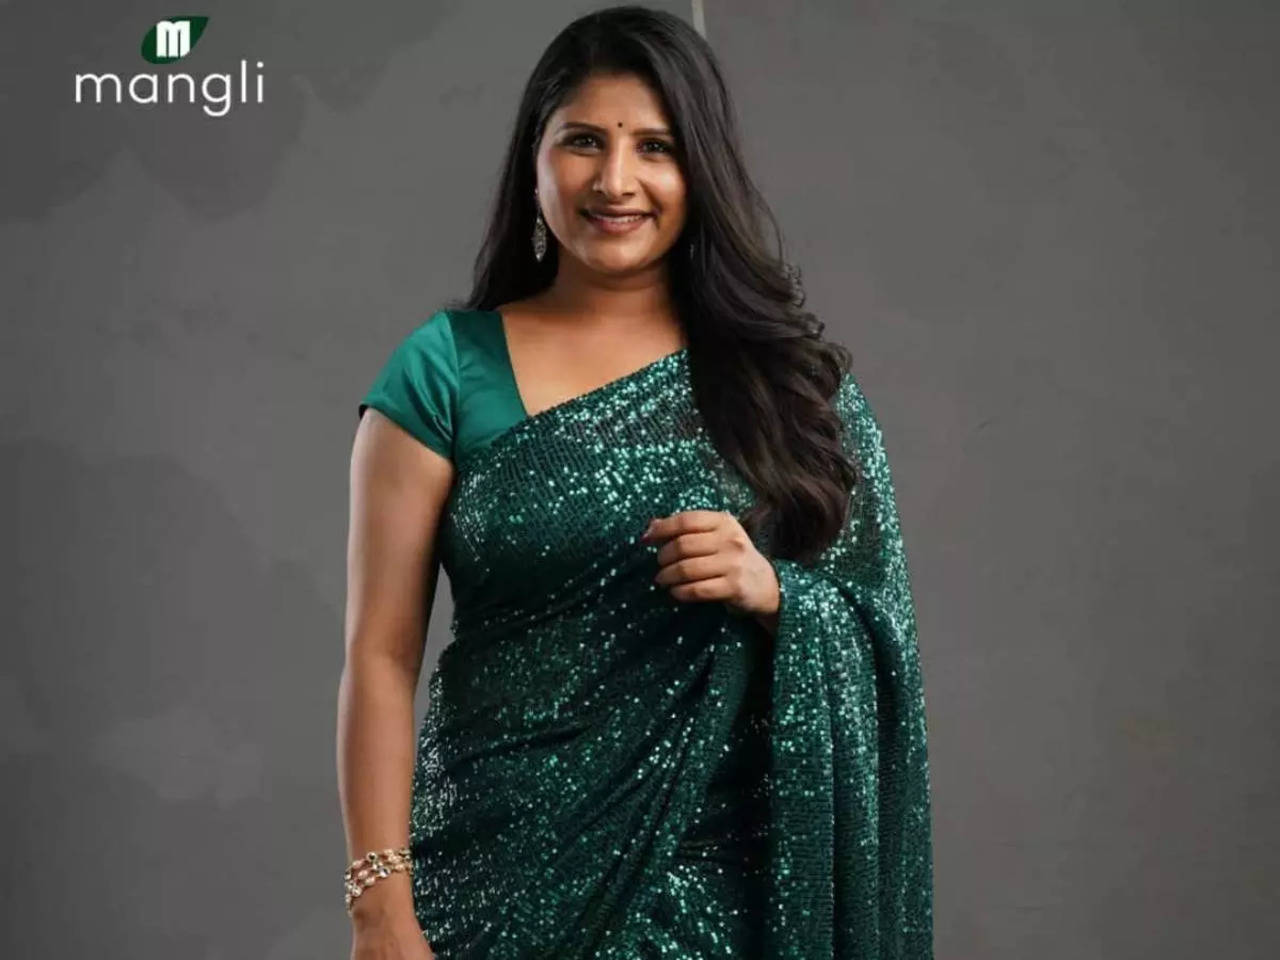 Singer Mangli grooves to her latest track 'Oo Anthiya' from 'Pushpa' |  Kannada Movie News - Times of India